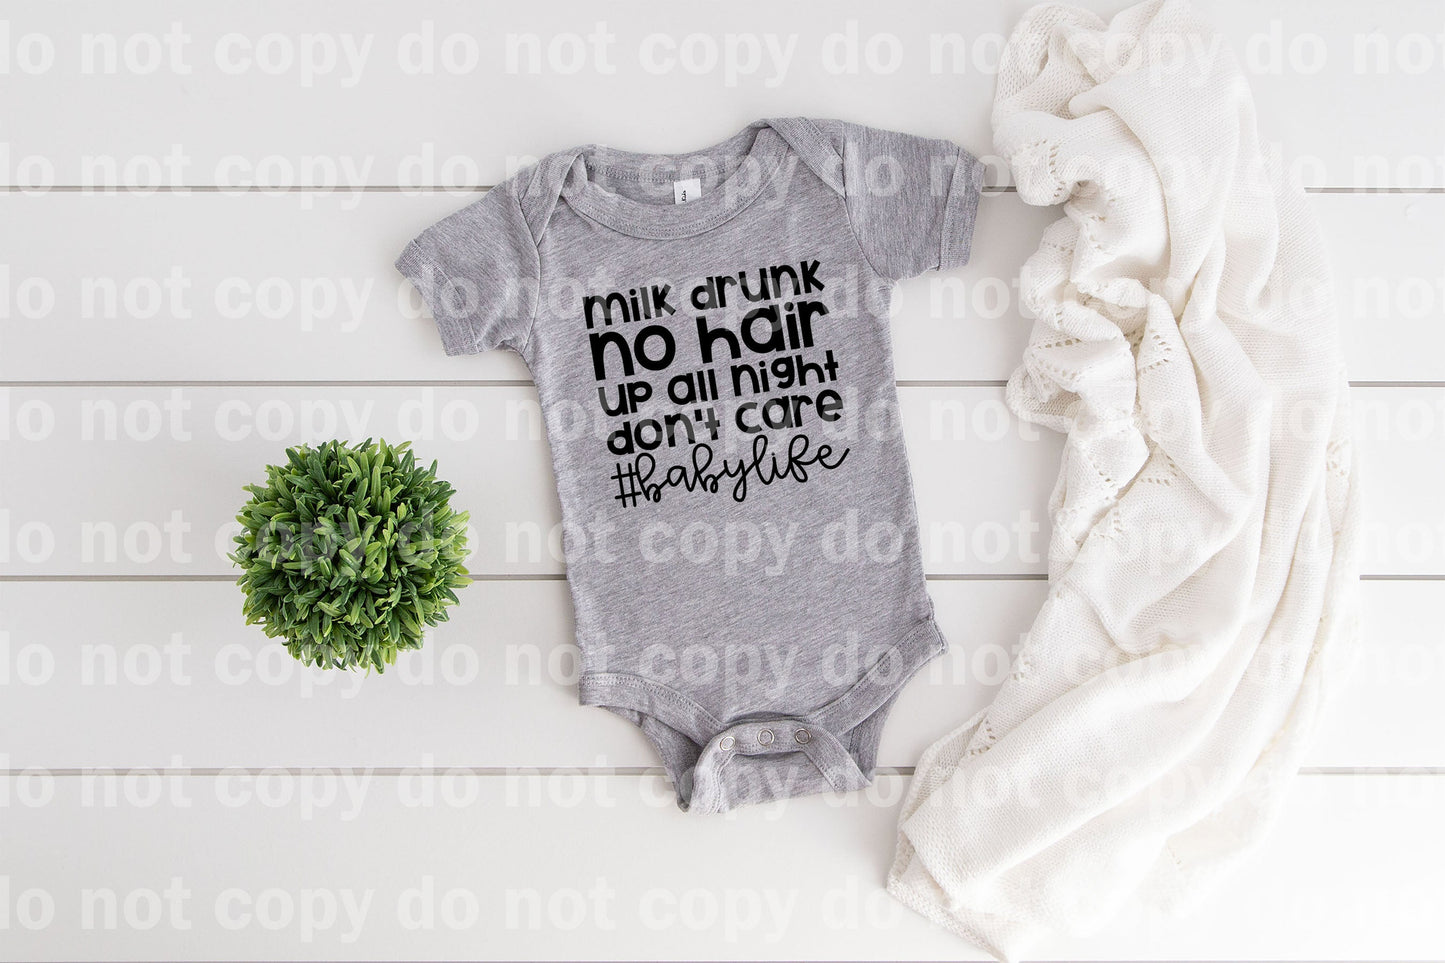 Milk Drunk No hair Up all night Don't care #babylife Dream Print or Sublimation Print